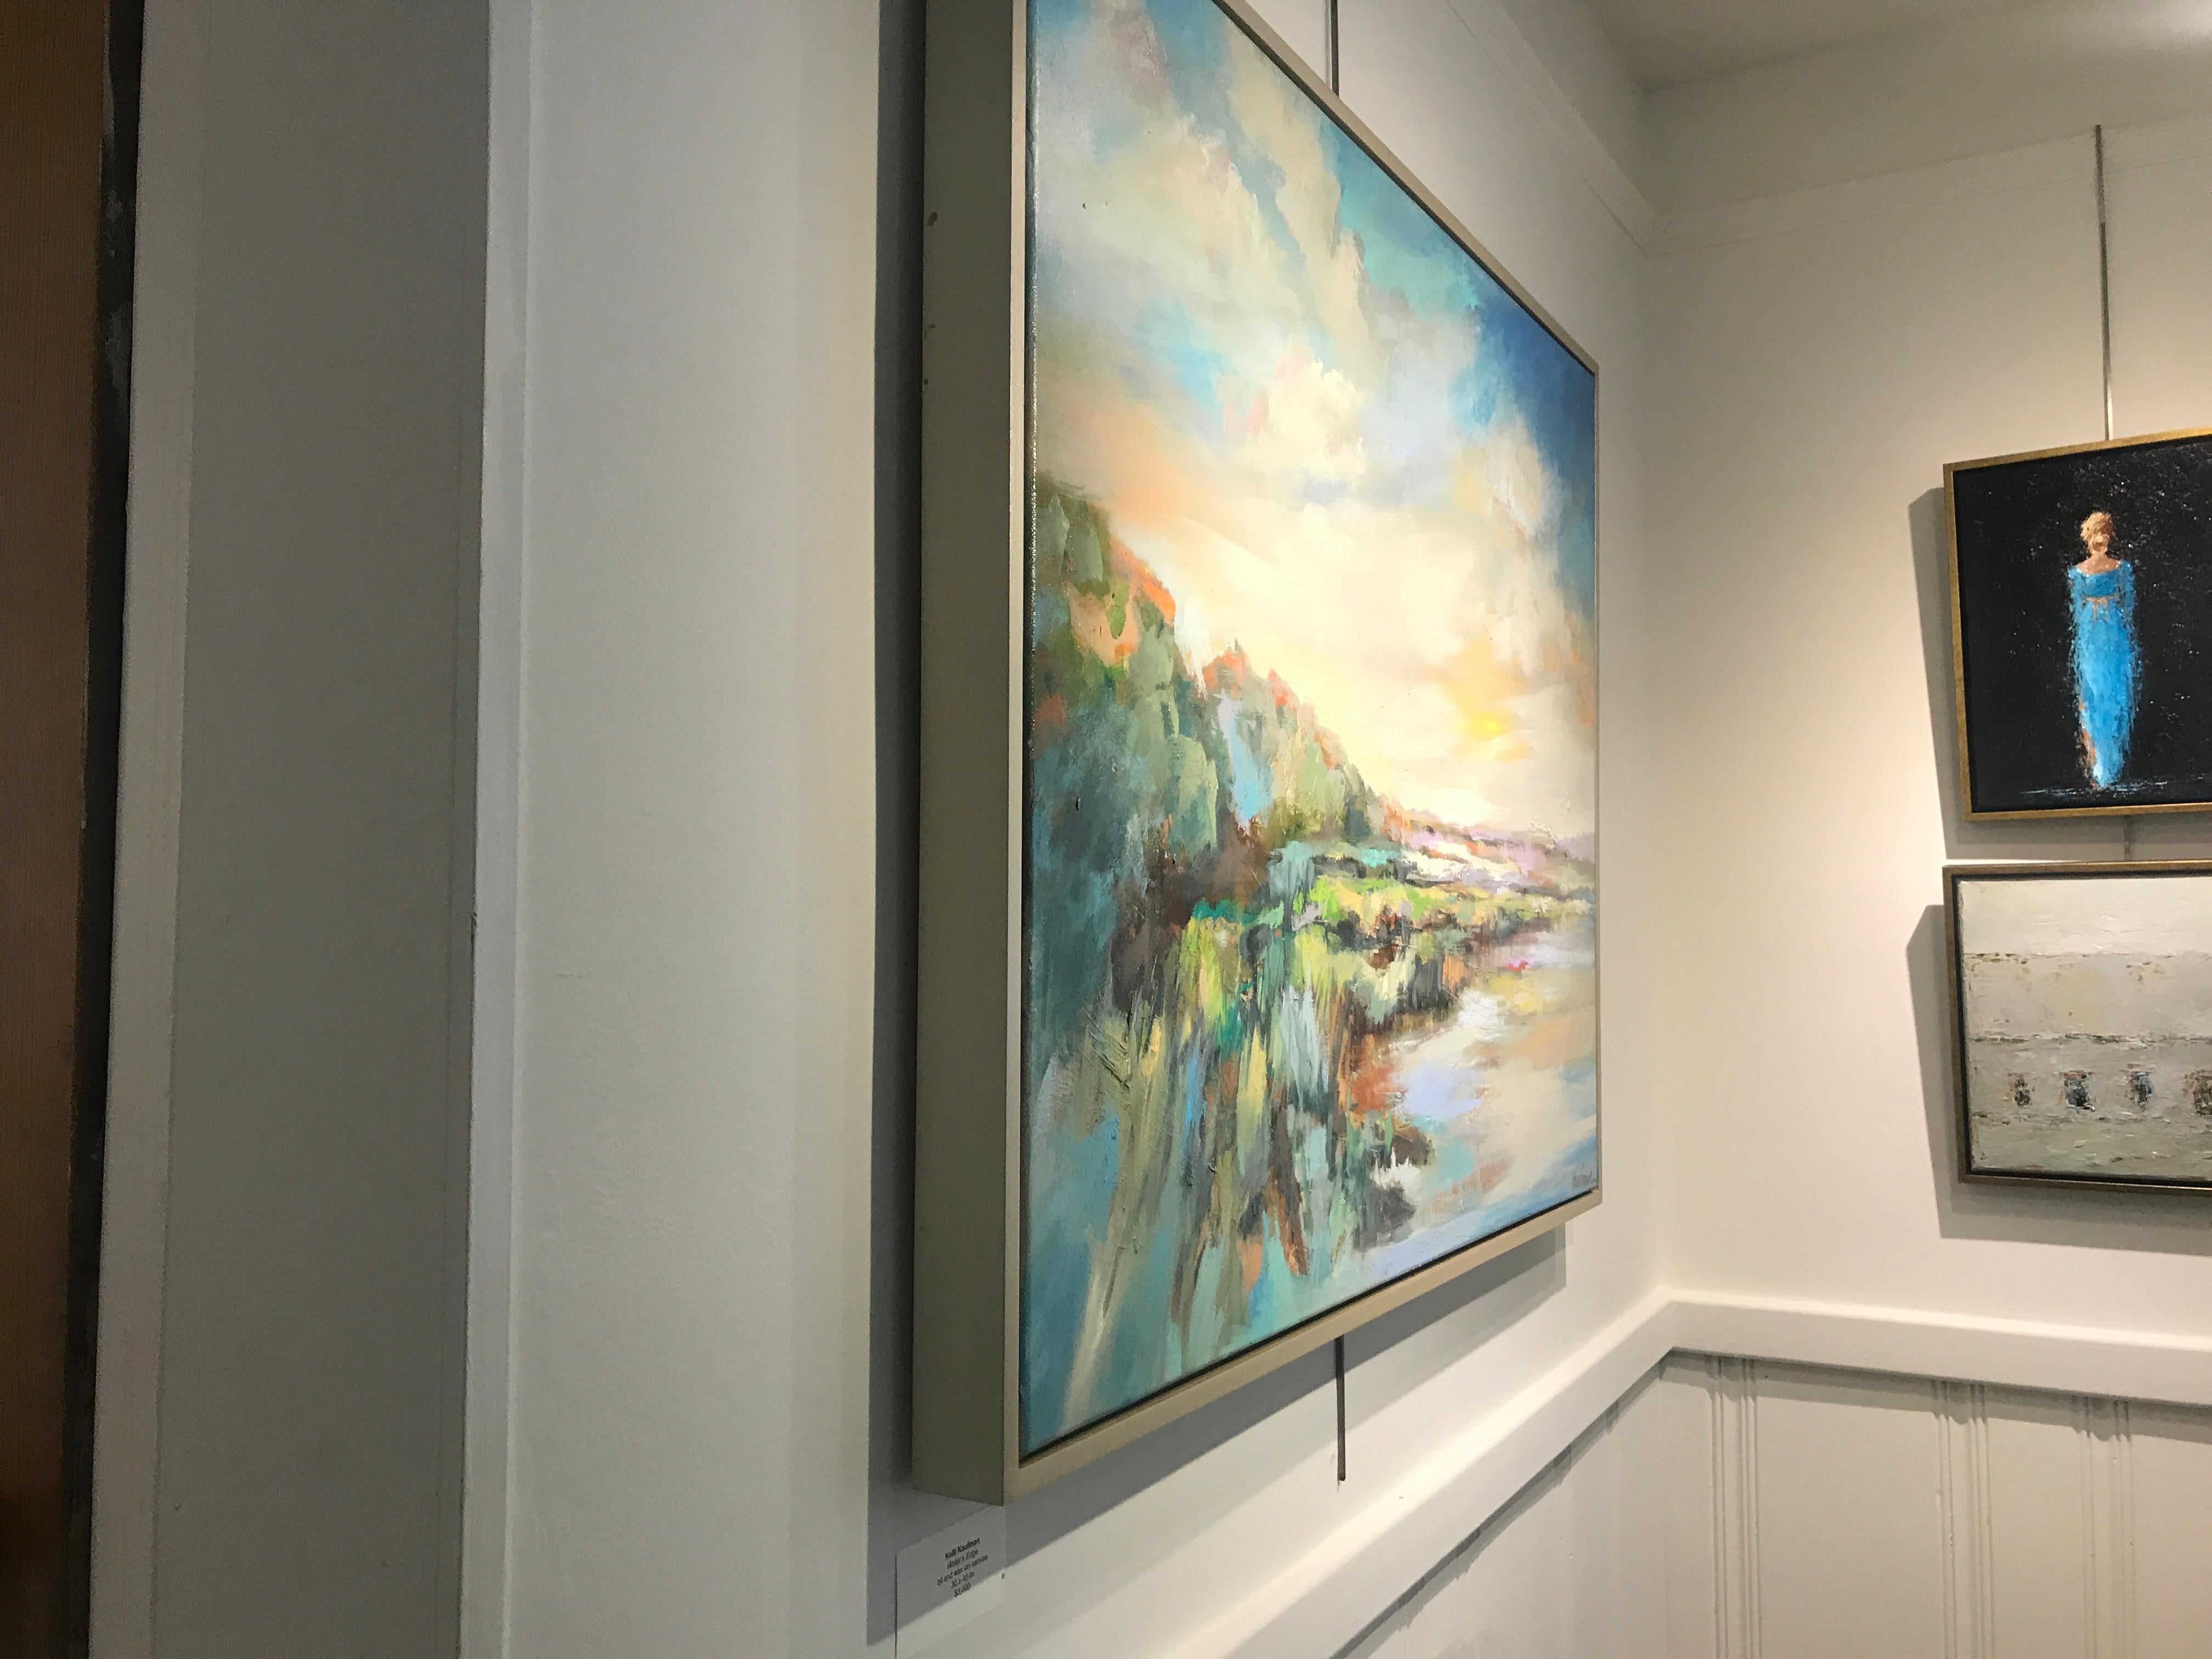 The framed size of this piece is 31.5 x 41.5 x 2

Louisiana-based visual artist Kelli Kaufman will showcase Third Coast: Landscapes of the Gulf South, a solo exhibit of her recent works. Third Coast is a cohesive collection of oil paintings inspired